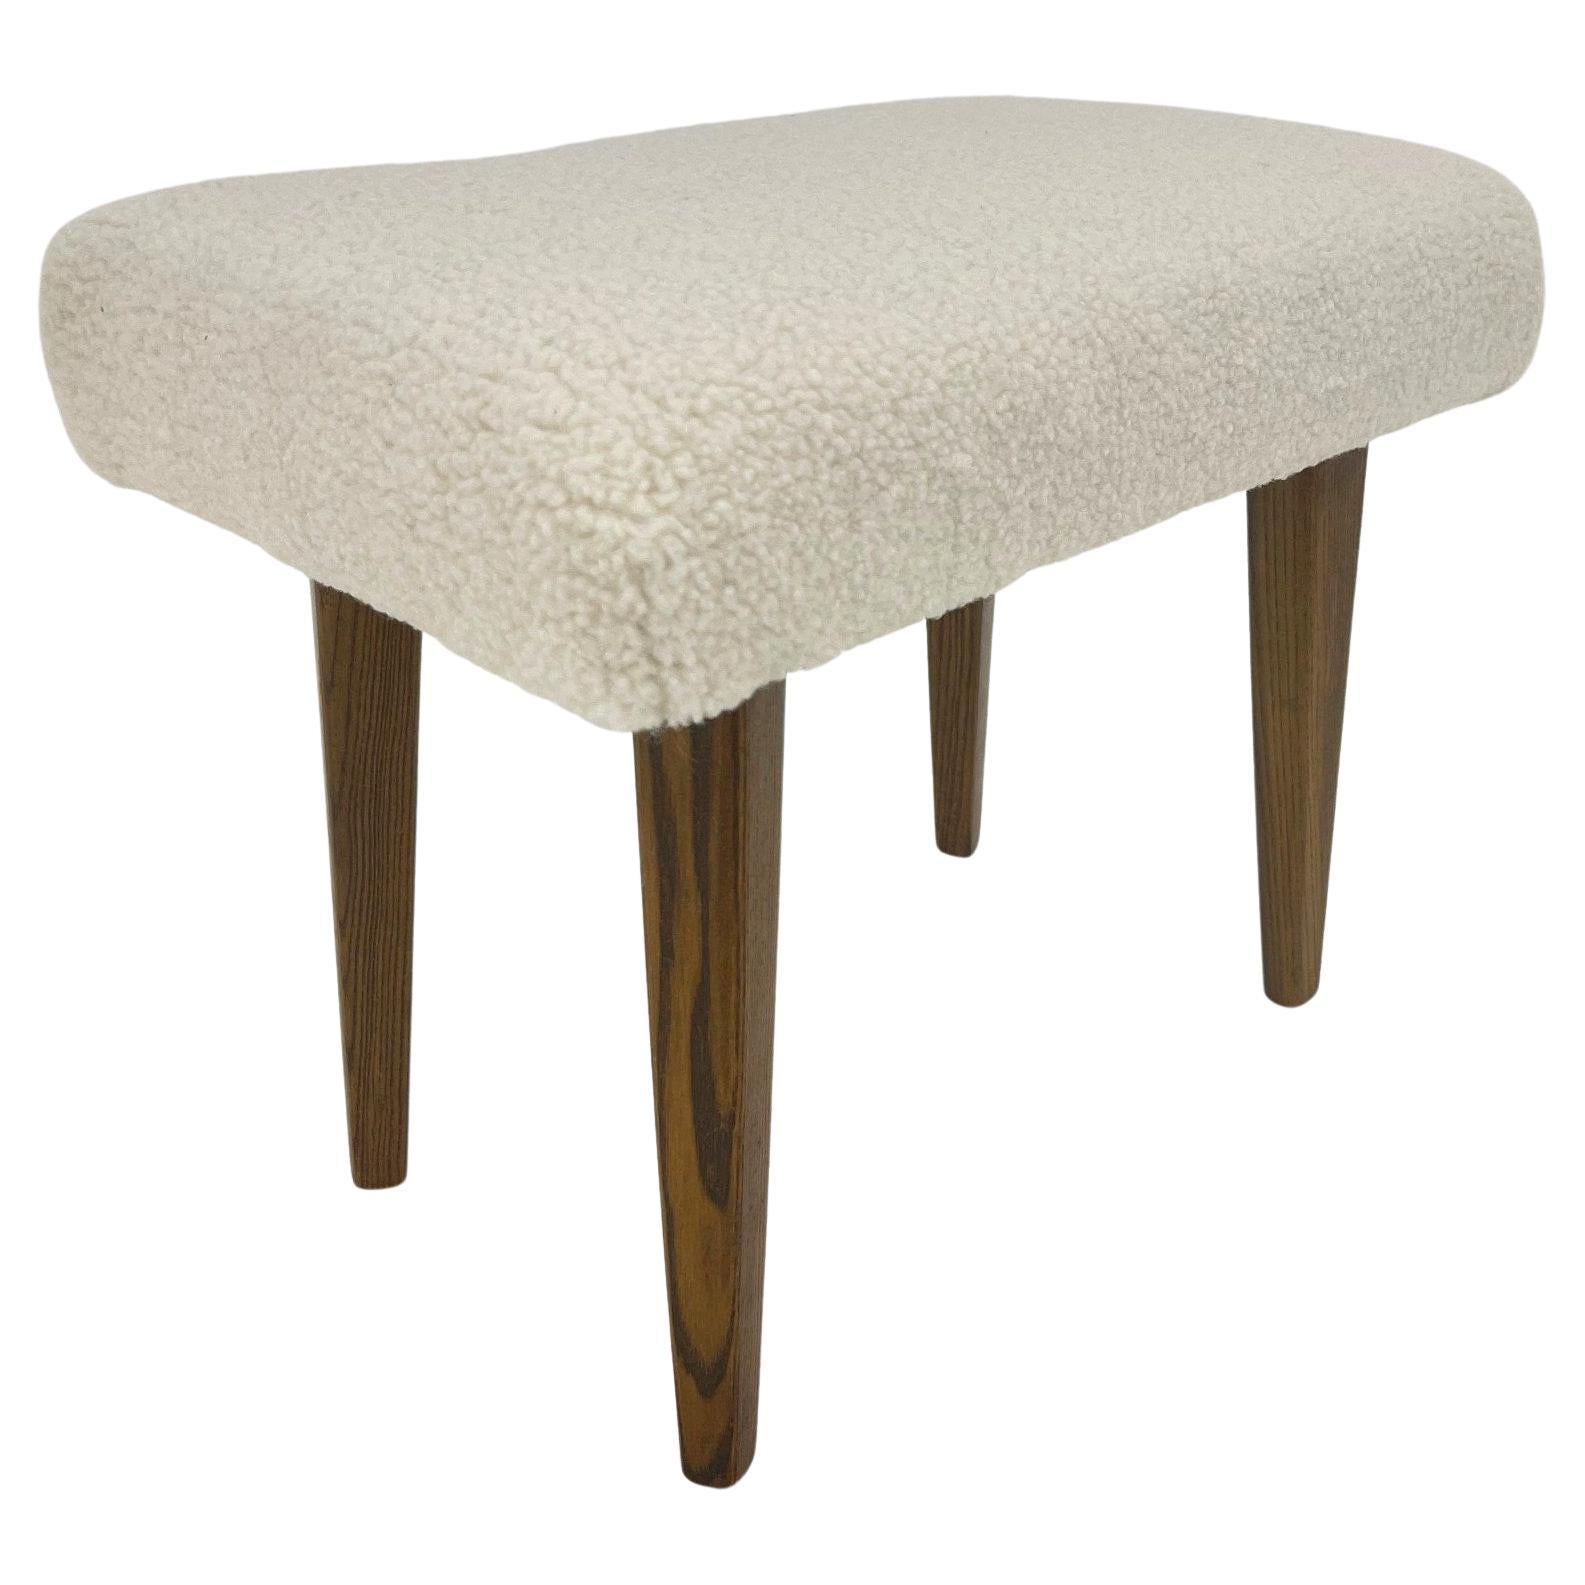 Mid-Century Stool in Sheep Skin Fabric, 1970's For Sale